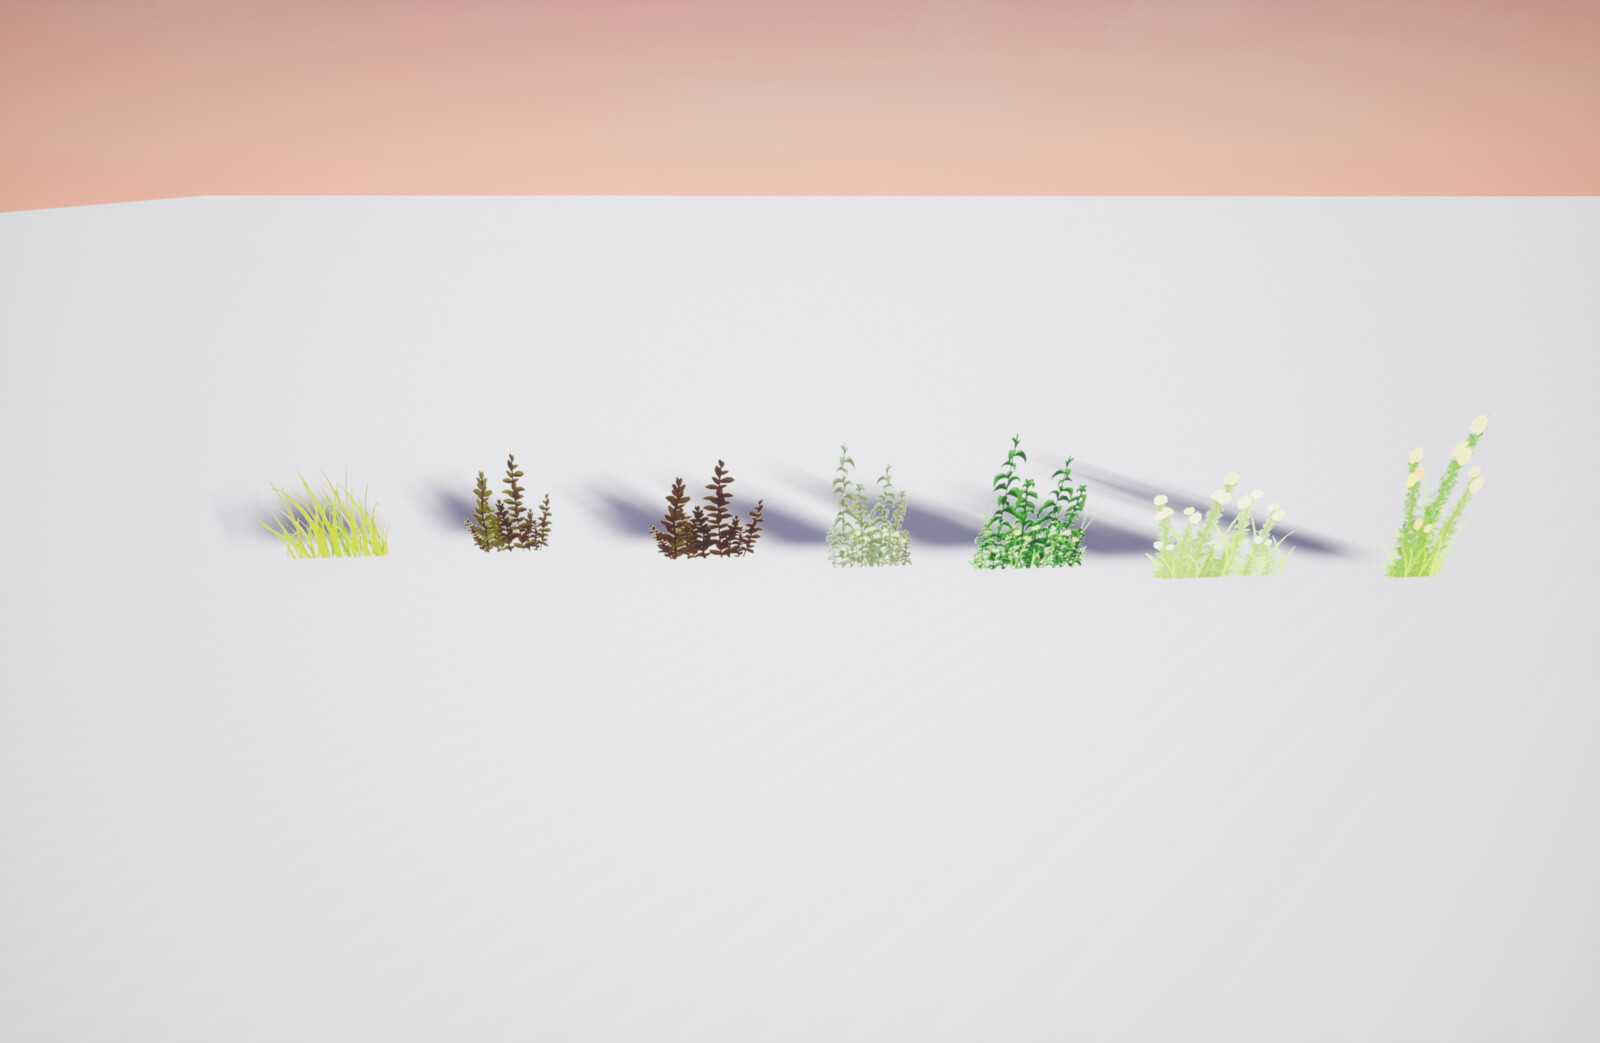 The different types of grass. While originally in different shades of green, the SpeedTreeColourVariation node was used to alter the colour of each grass instance.